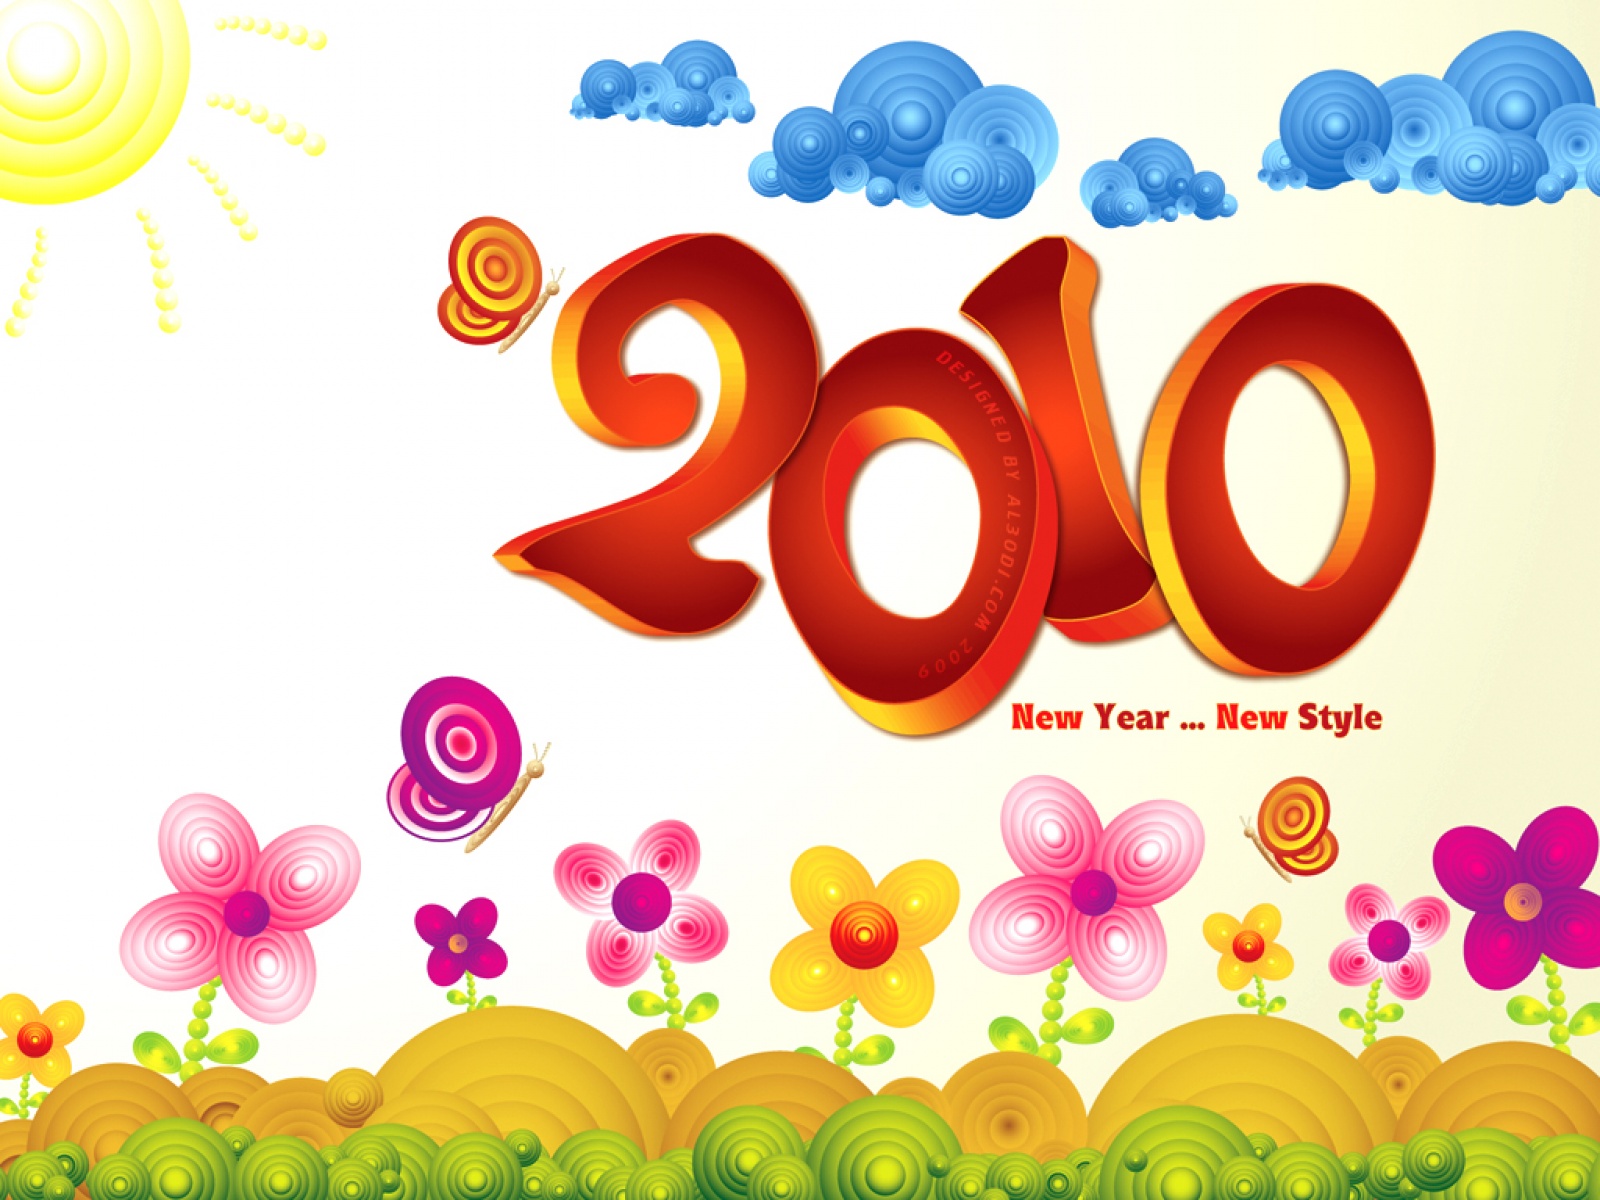 New Year Style Desktop And Mobile Wallpaper Wallippo